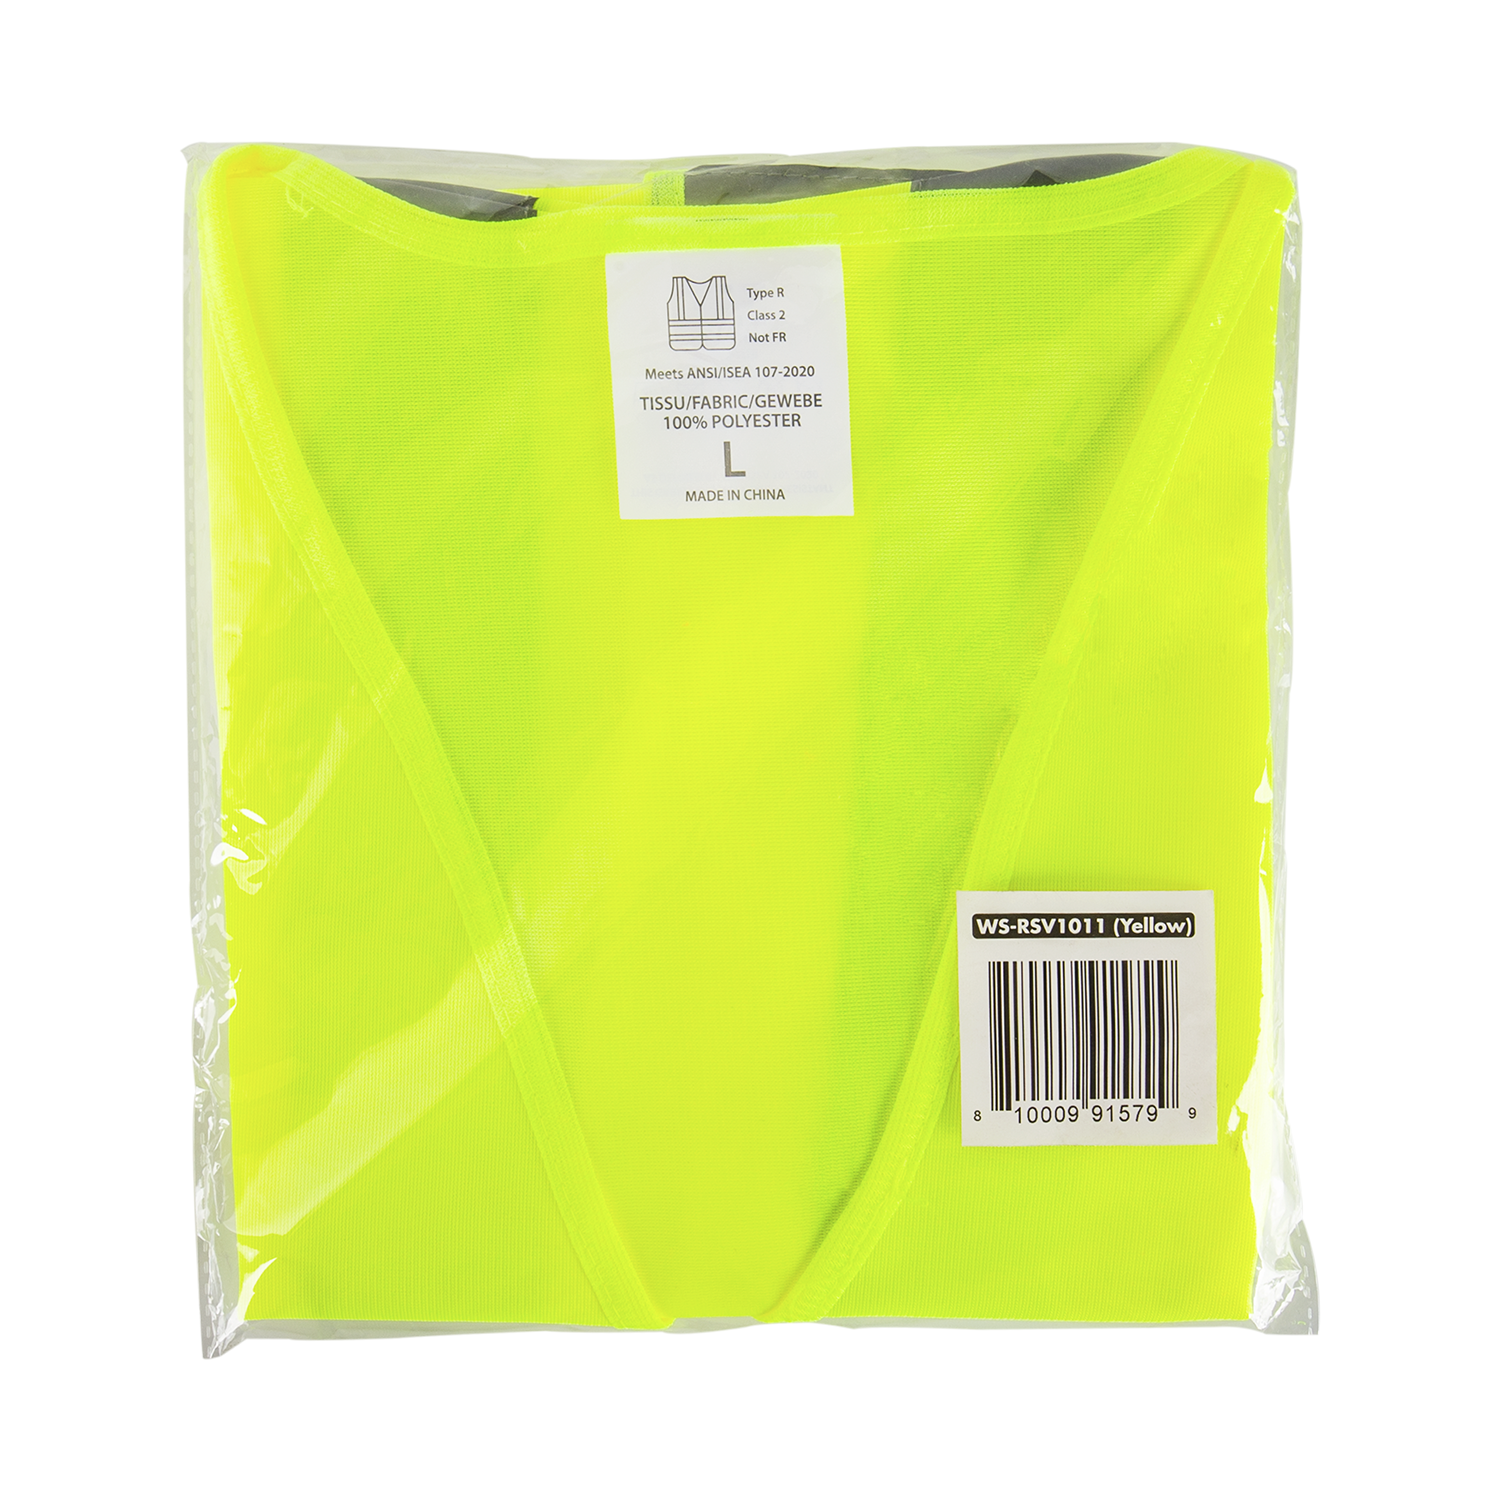 Karat High Visibility Reflective Safety Vest with Velcro Fastening (Yellow), Large - 1 pc